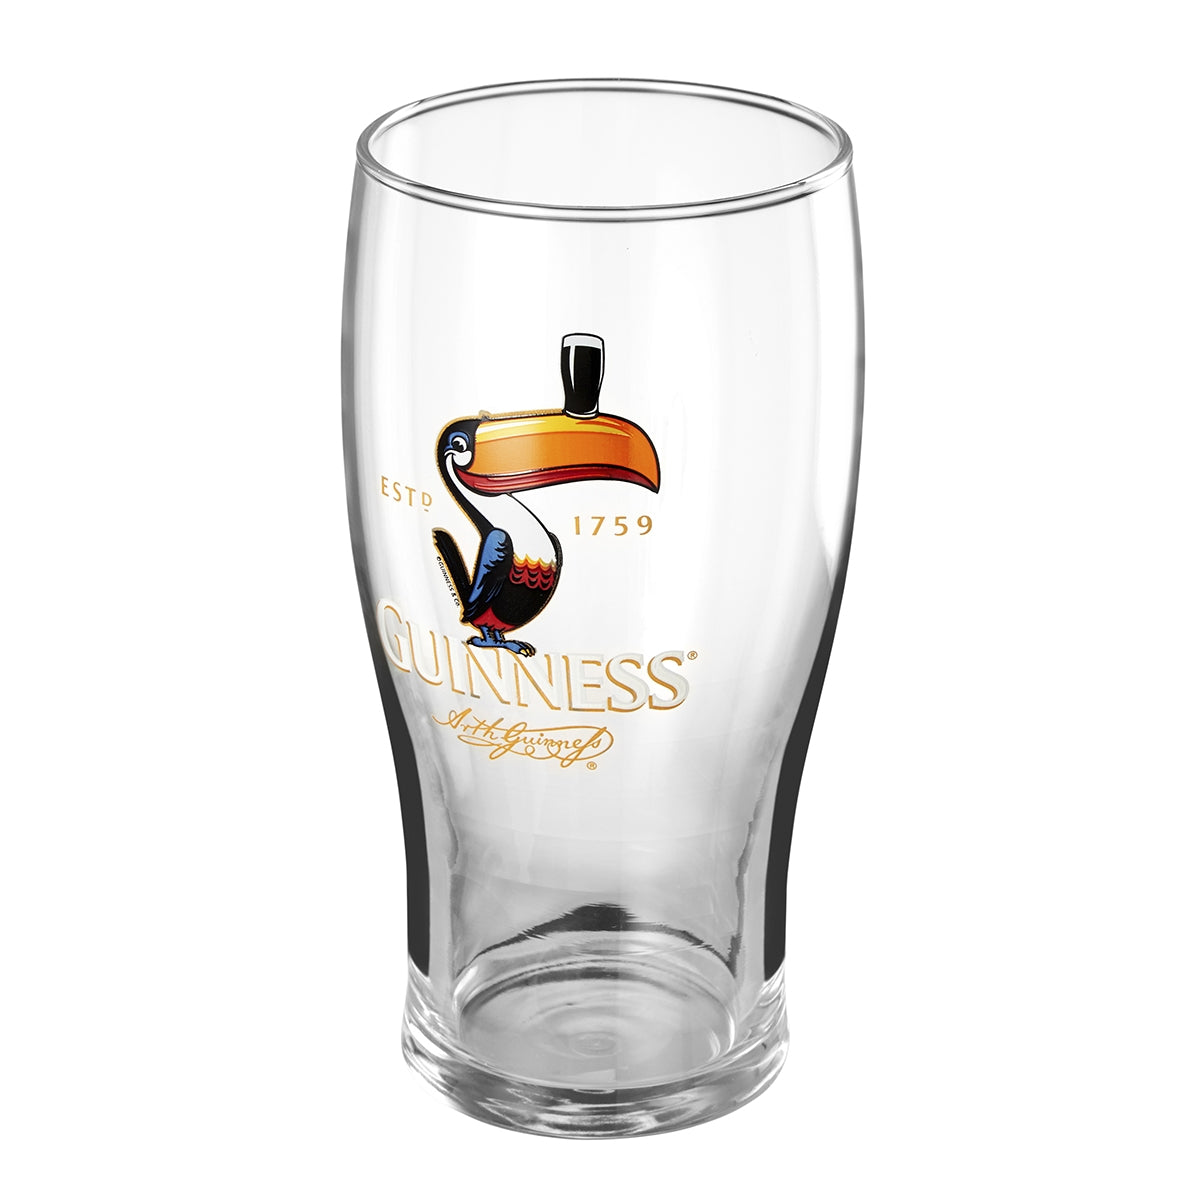 Official Guinness Toucan Pint Glass 12 Pack with an image of a toucan.